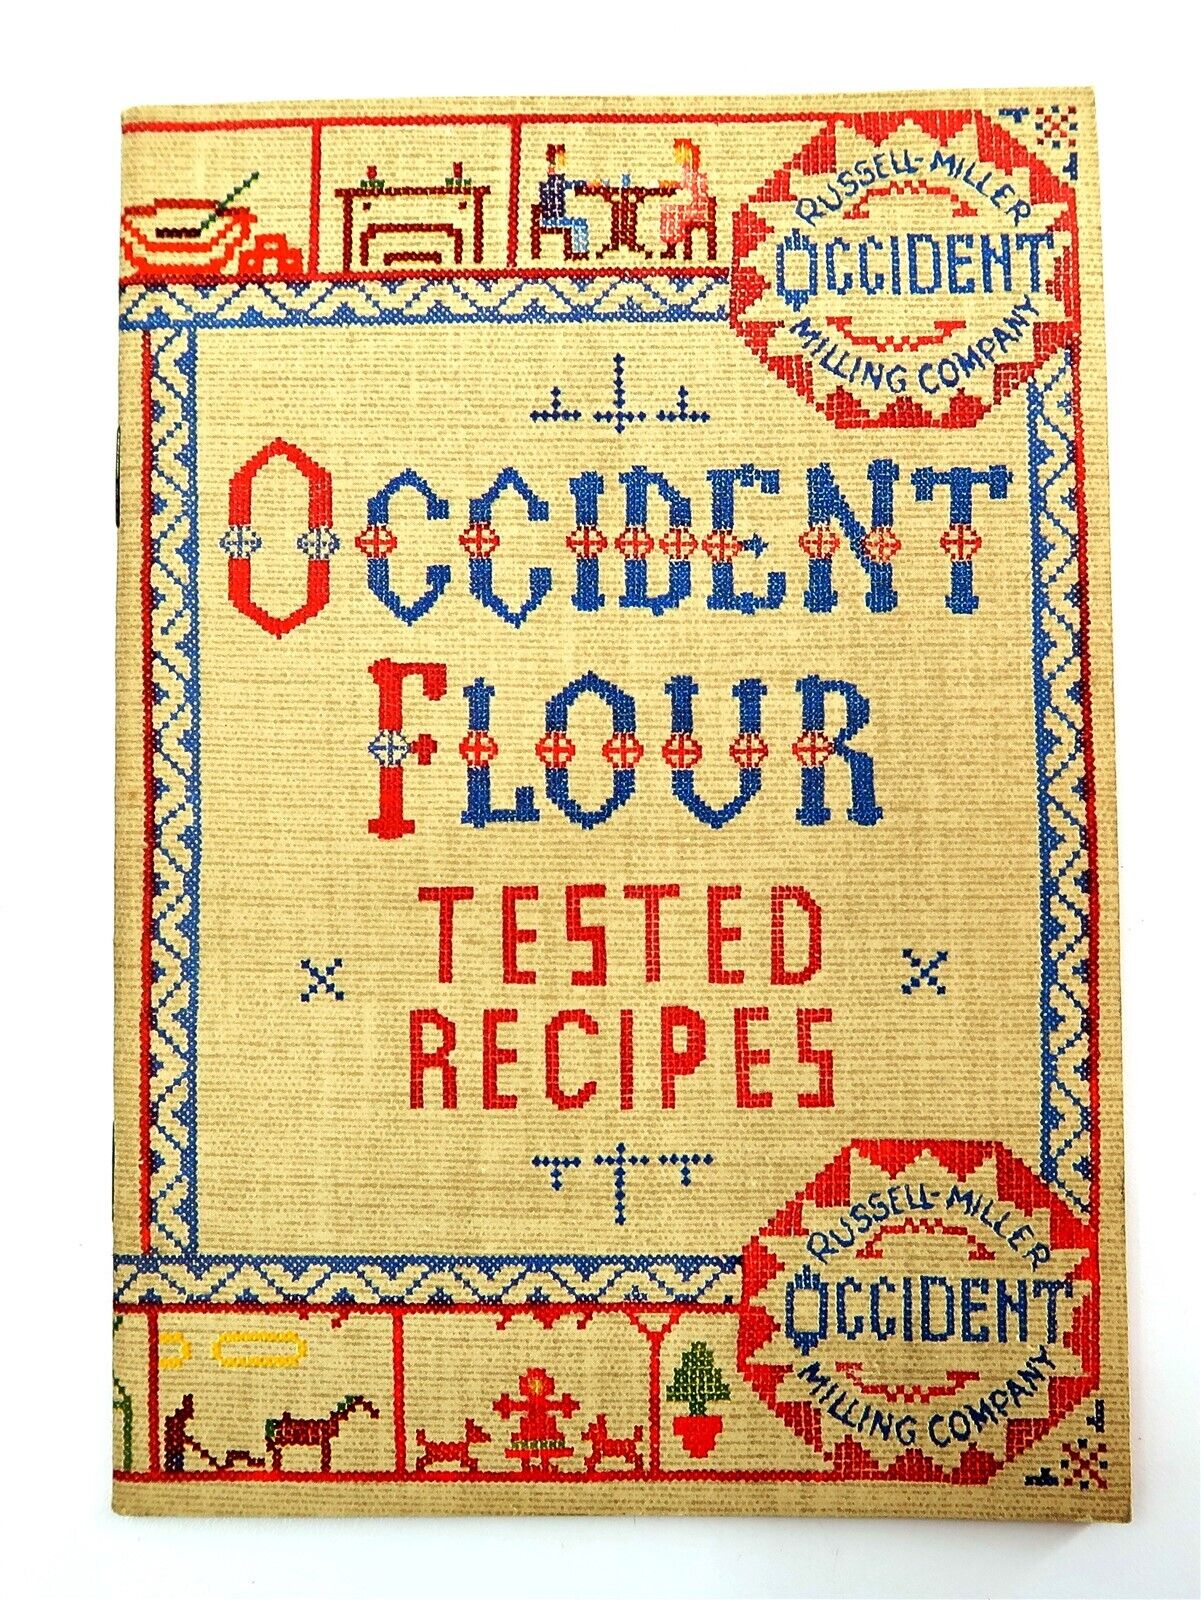 1930's RUSSELL MILLER OCCIDENT FLOUR Advertising Recipes Booklet Cookbook